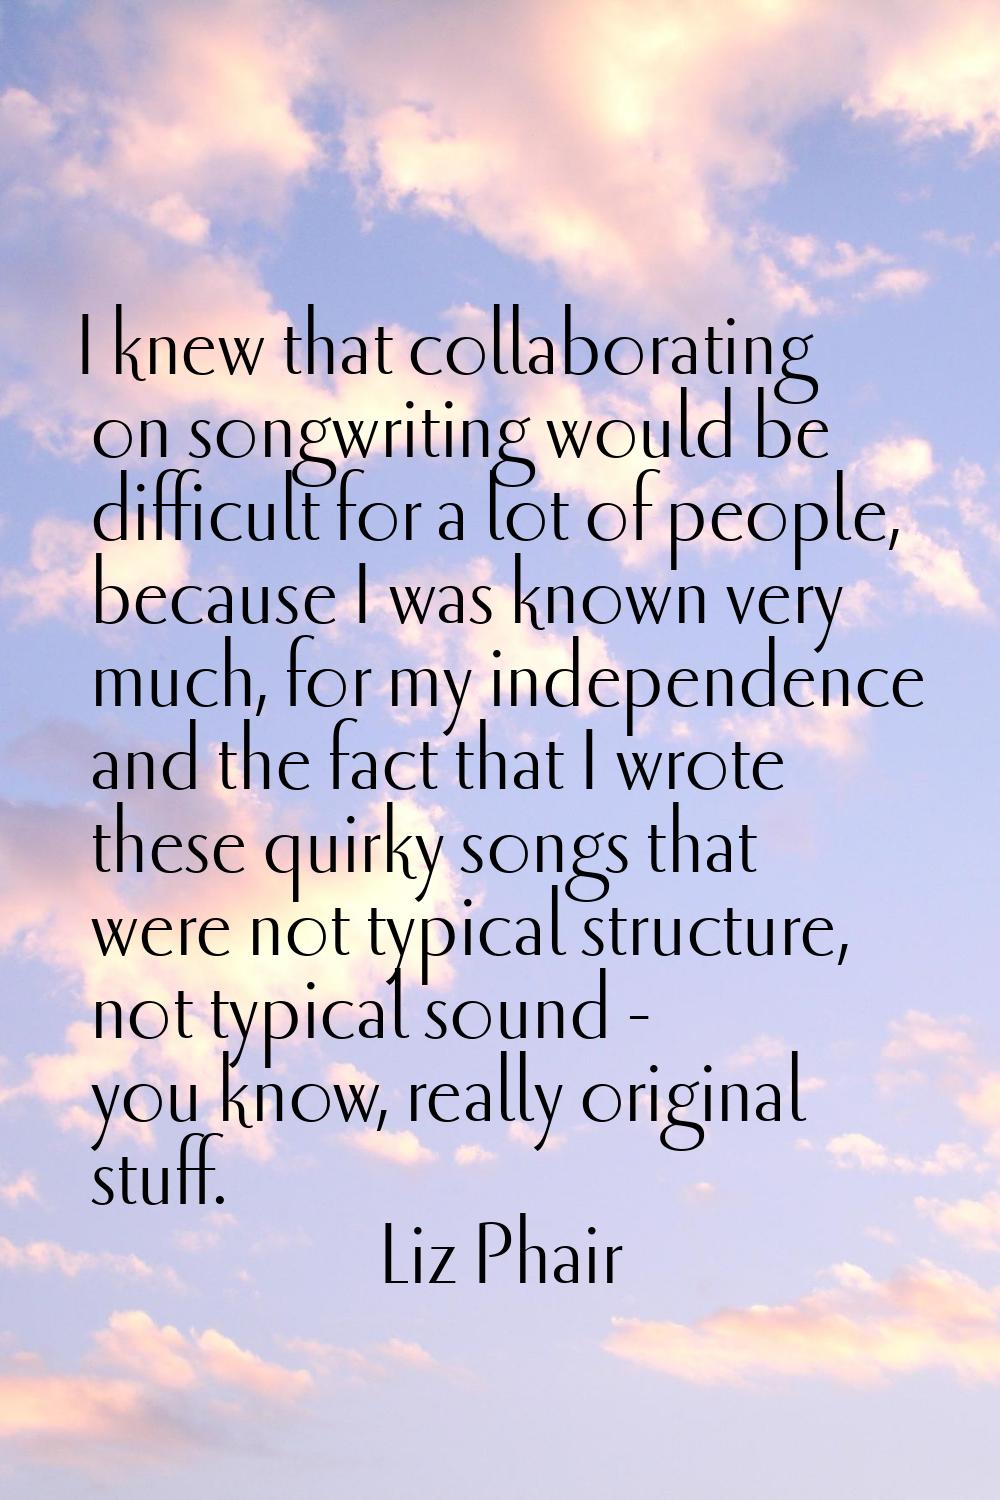 I knew that collaborating on songwriting would be difficult for a lot of people, because I was know